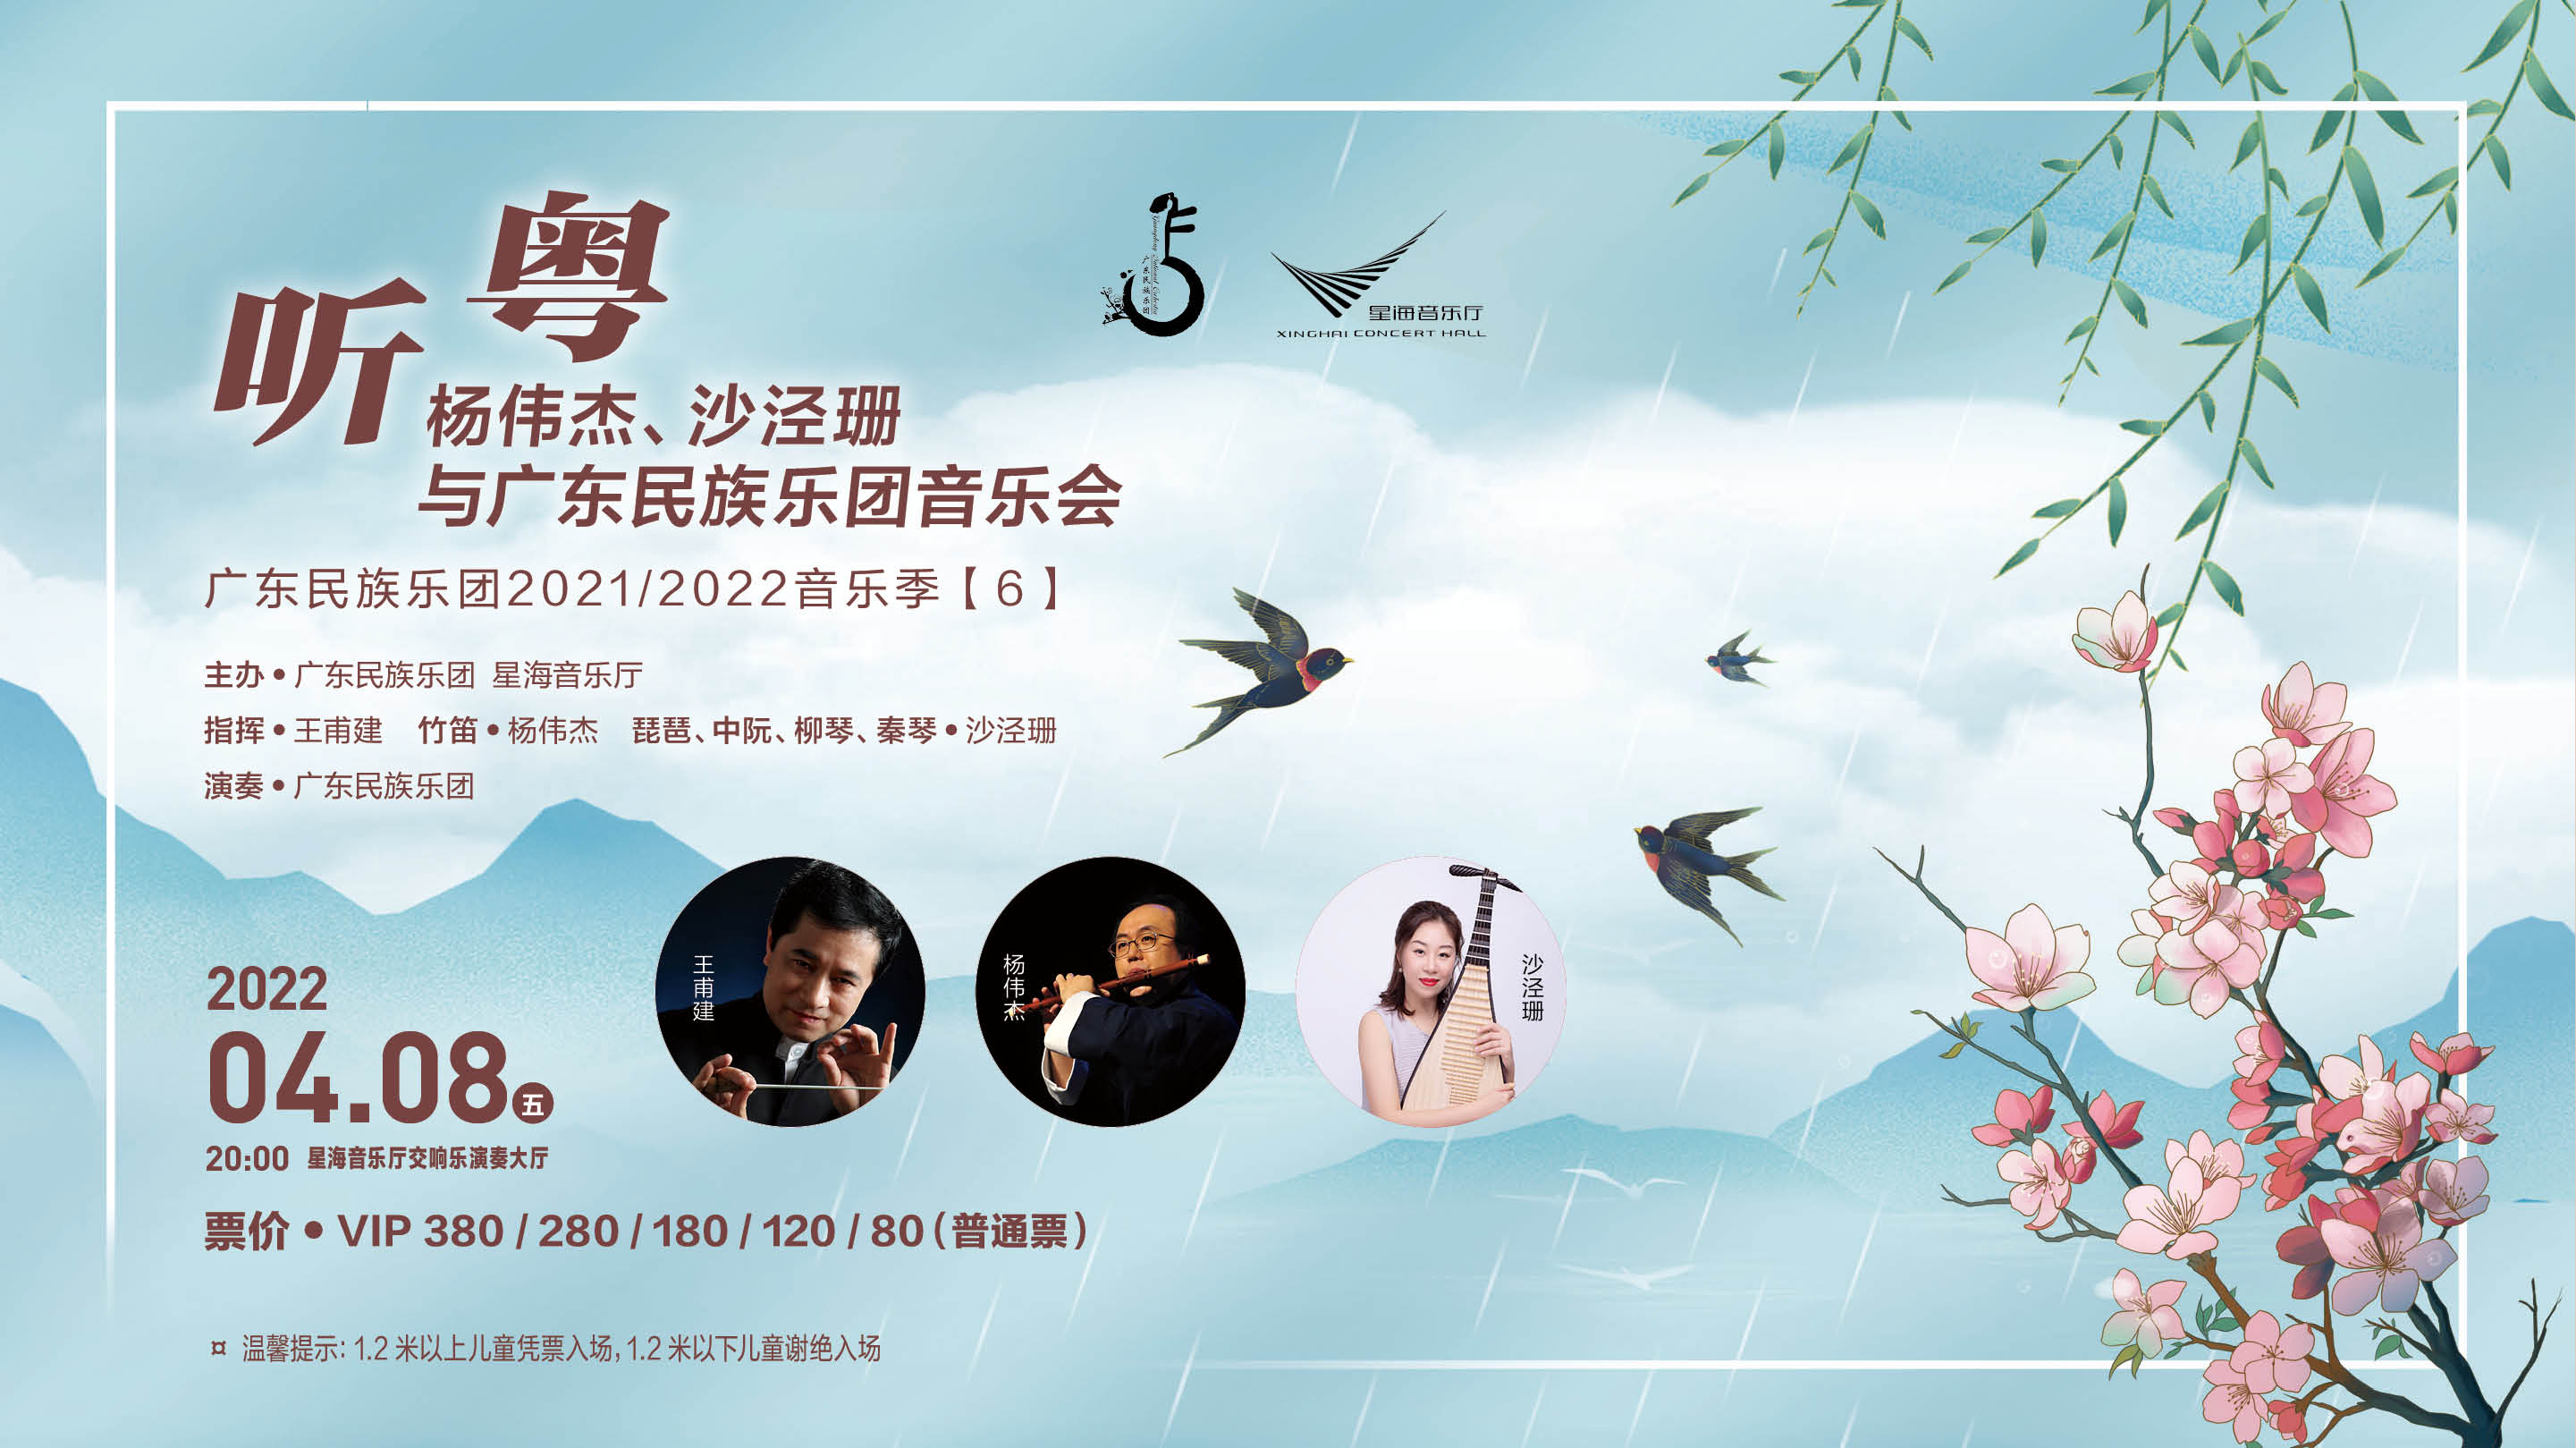 Listening to Guangdong - Yang Weijie, Sha Jingshan and the Guangdong Chinese Orchestra Concert